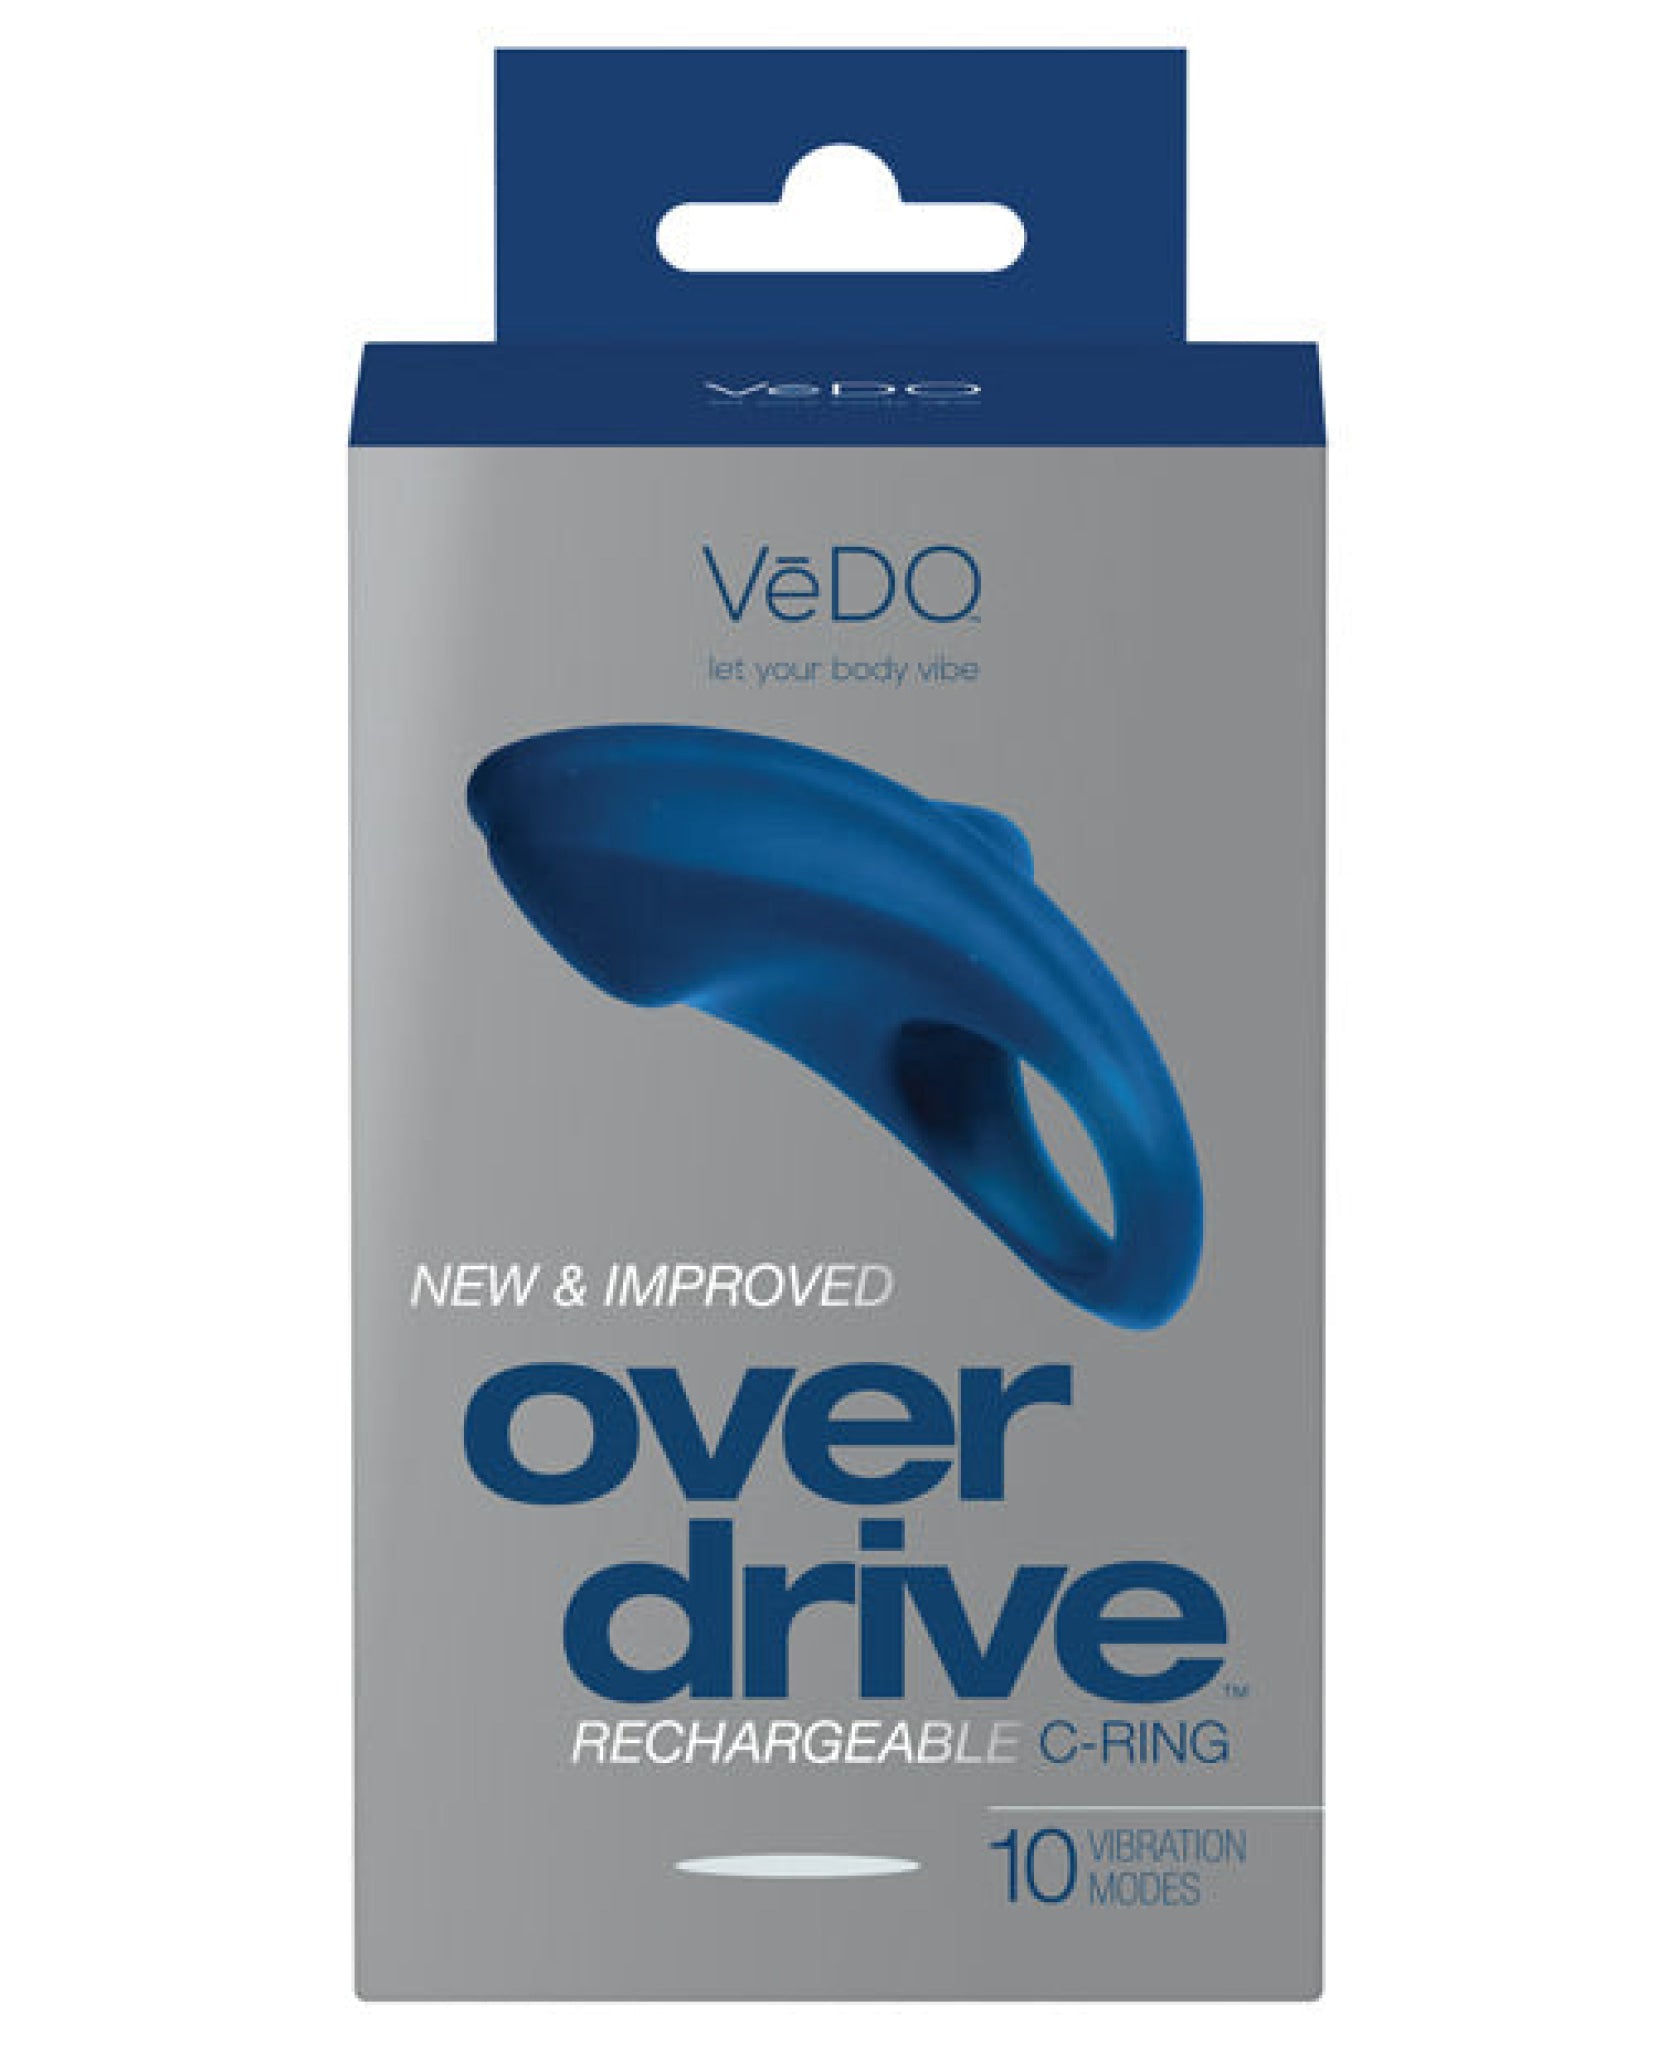 Vedo Overdrive Rechargeable C Ring VēDO